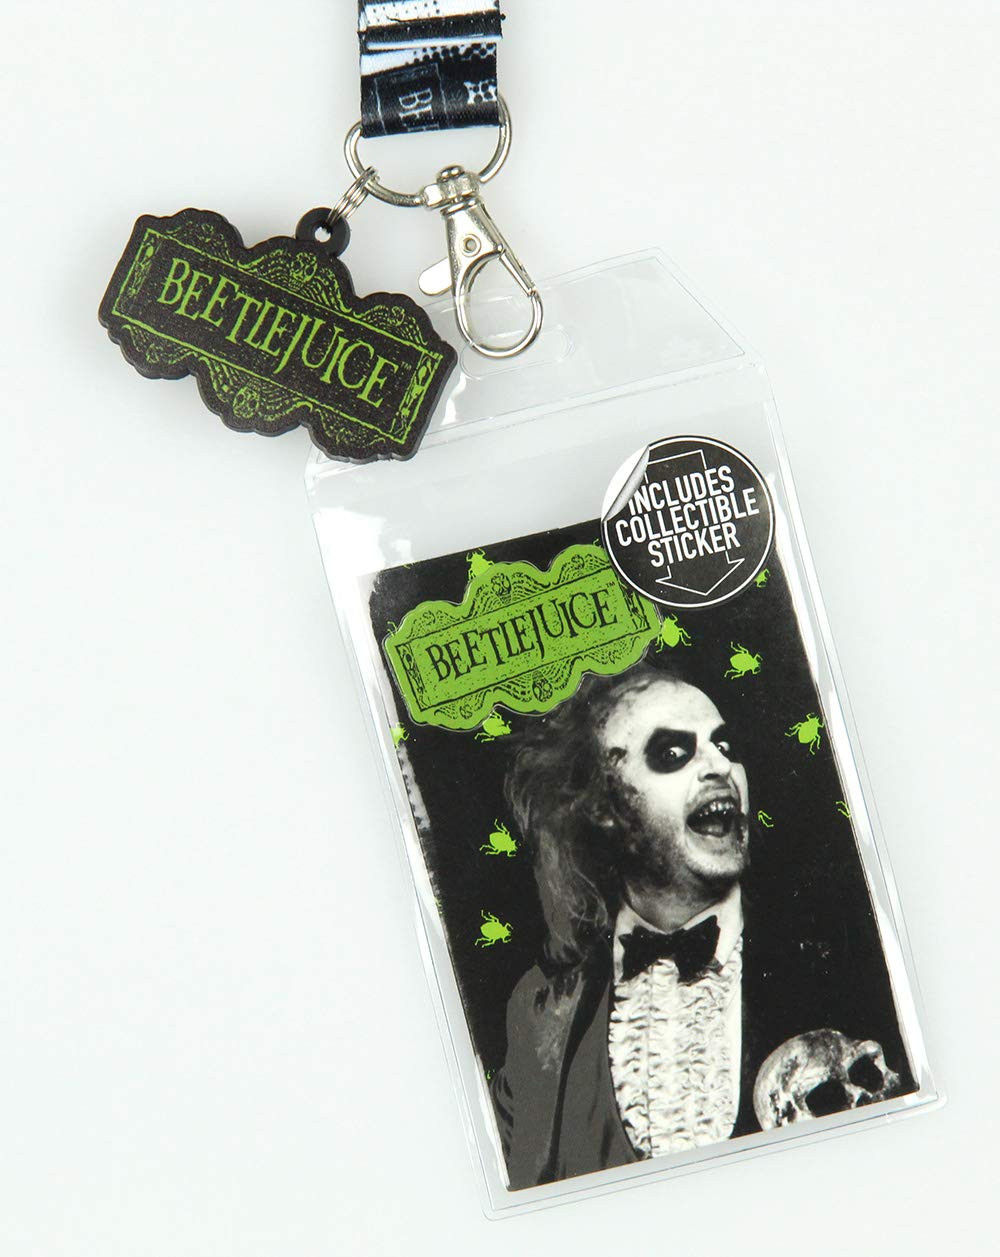 Beetlejuice Never Trust The Living Lanyard ID Holder with Rubber Charm and Collectible Sticker